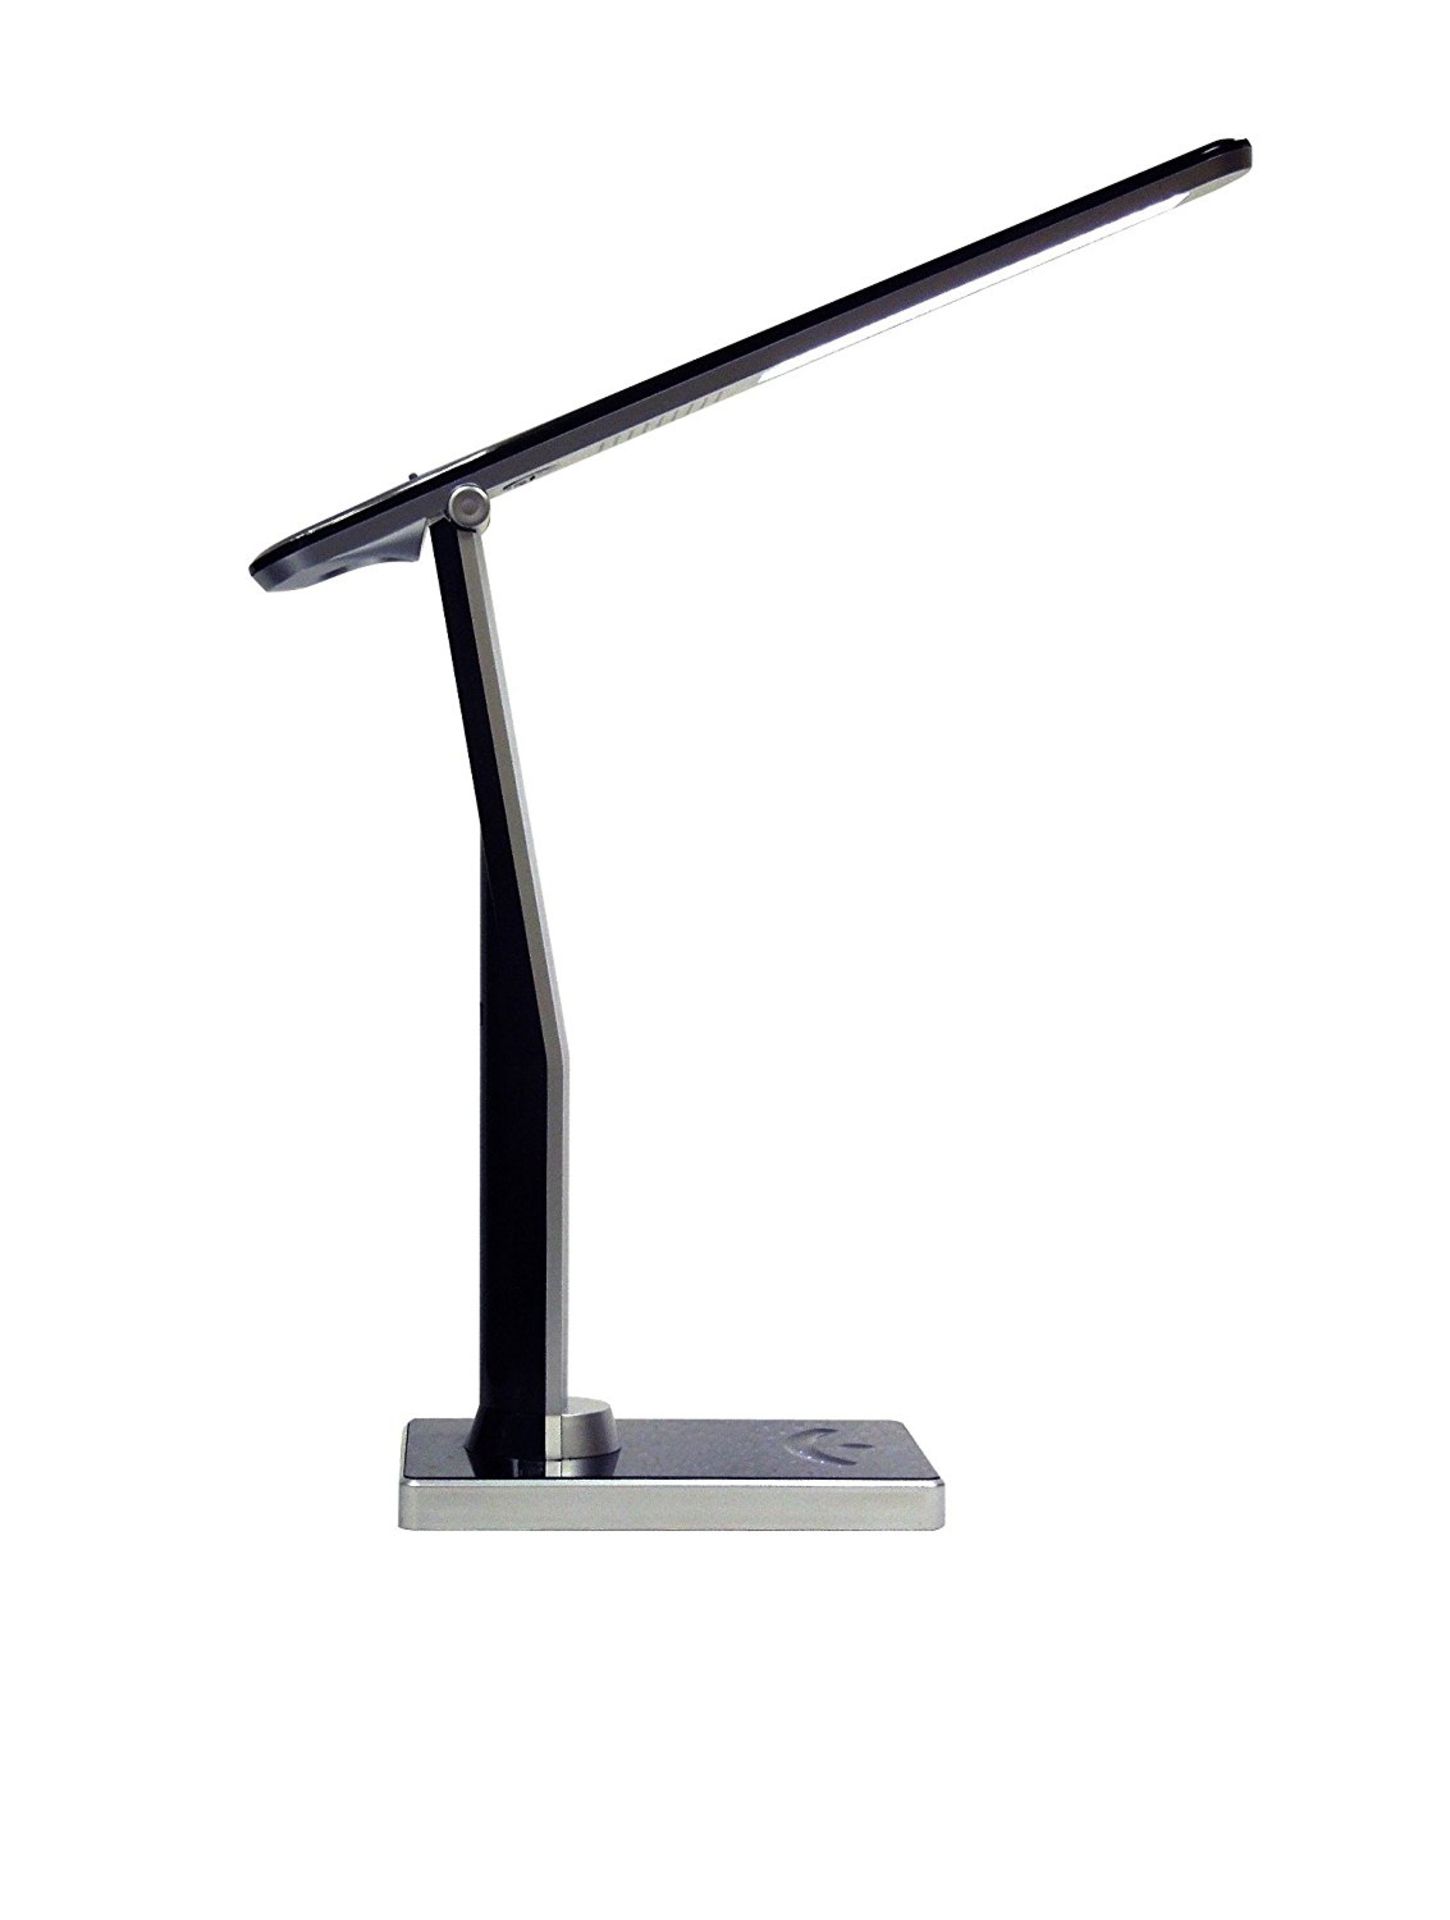 V Brand New Lifemax Pelican LED Light with Clock - One Touch Control For Adjustable Brightness - - Bild 2 aus 2